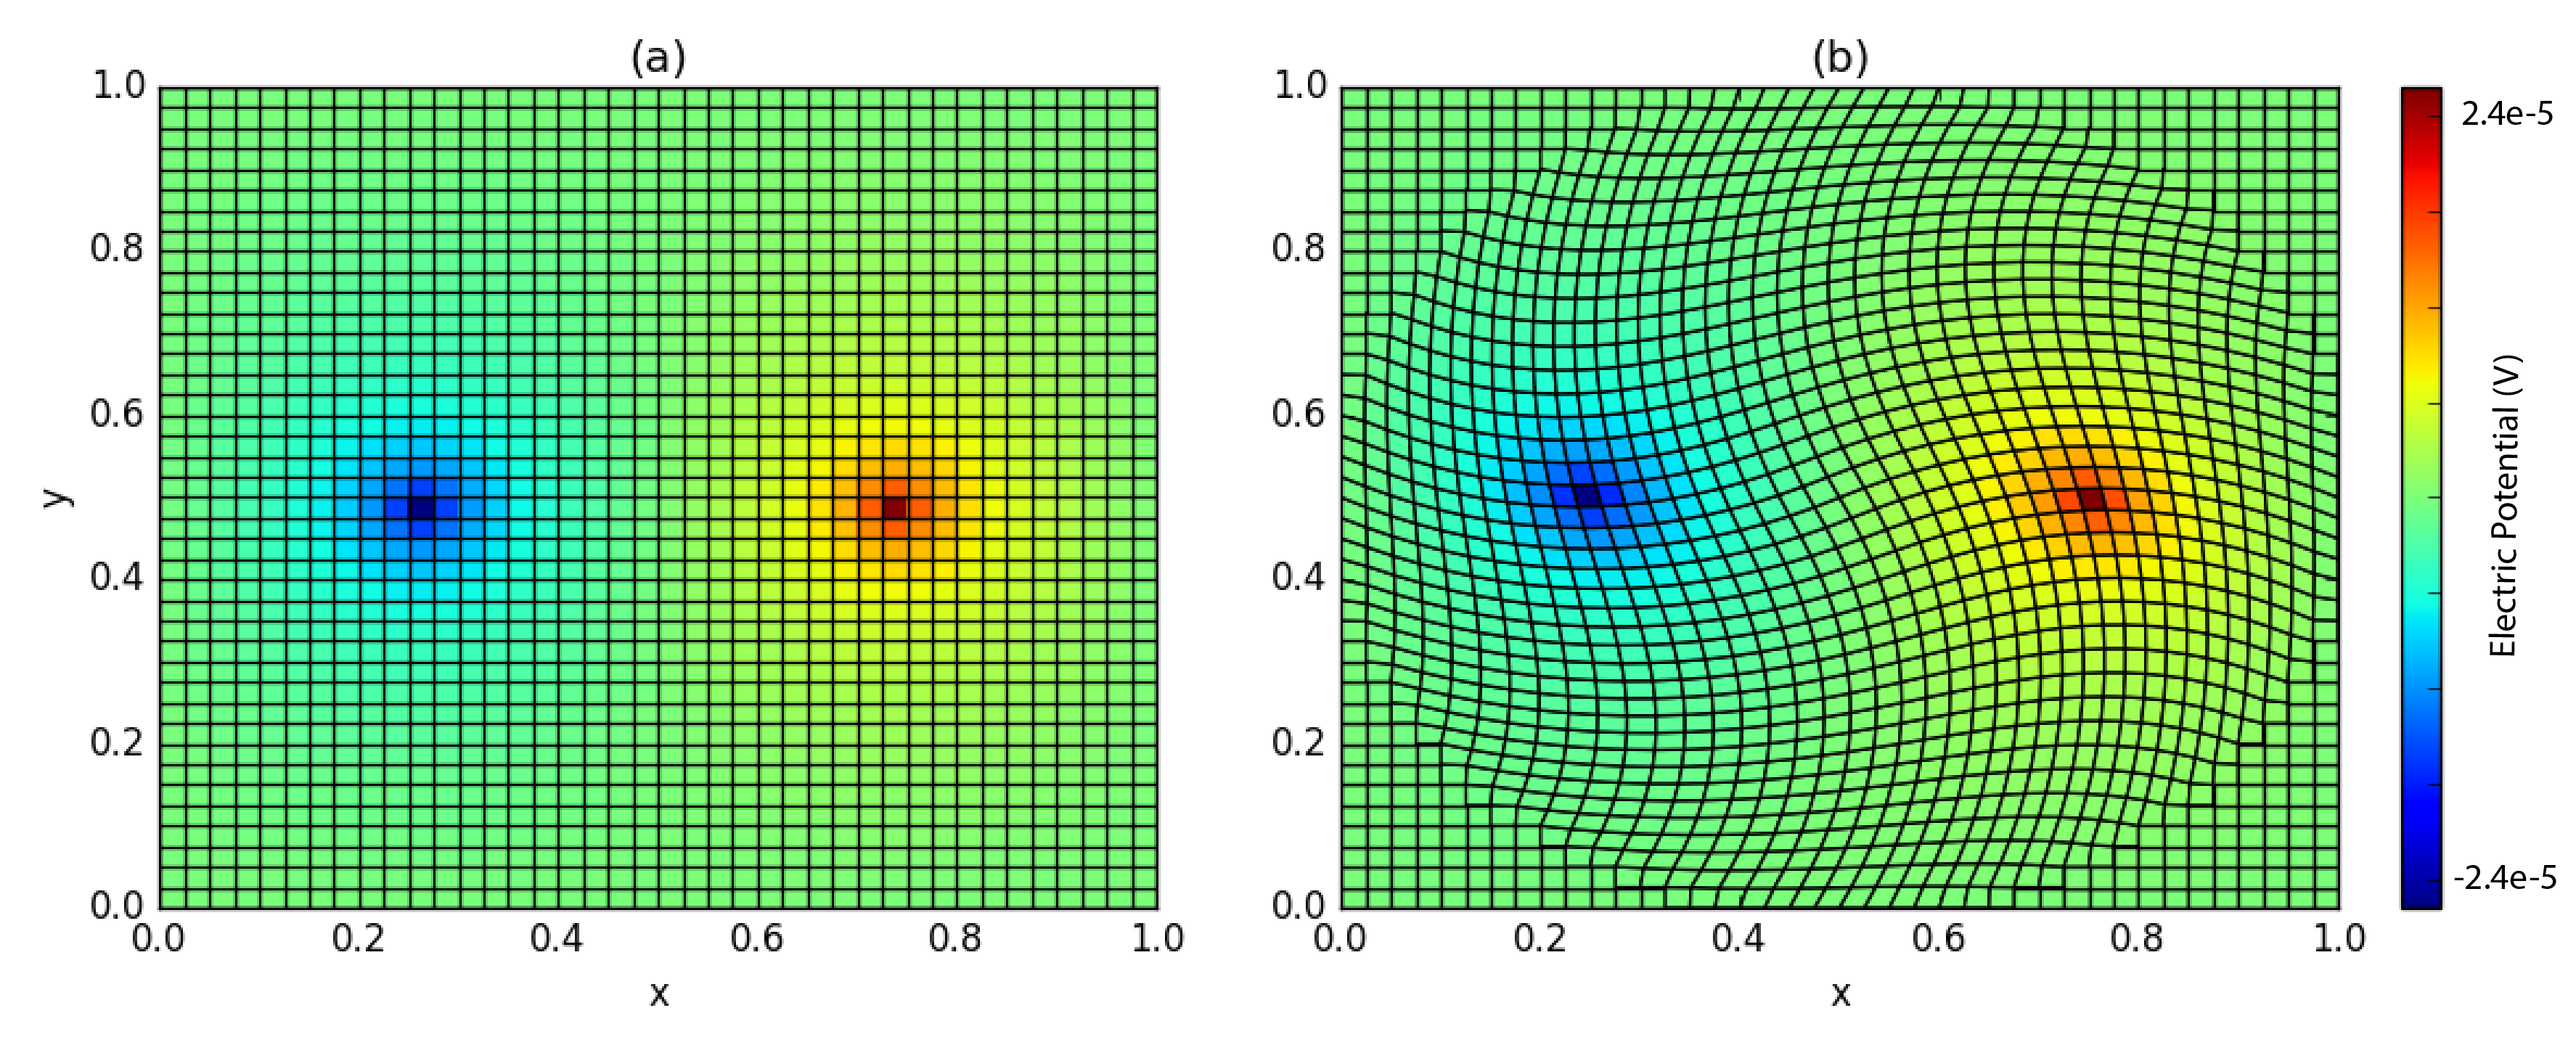 Electric potential on (a) tensor and (b) curvilinear meshes.